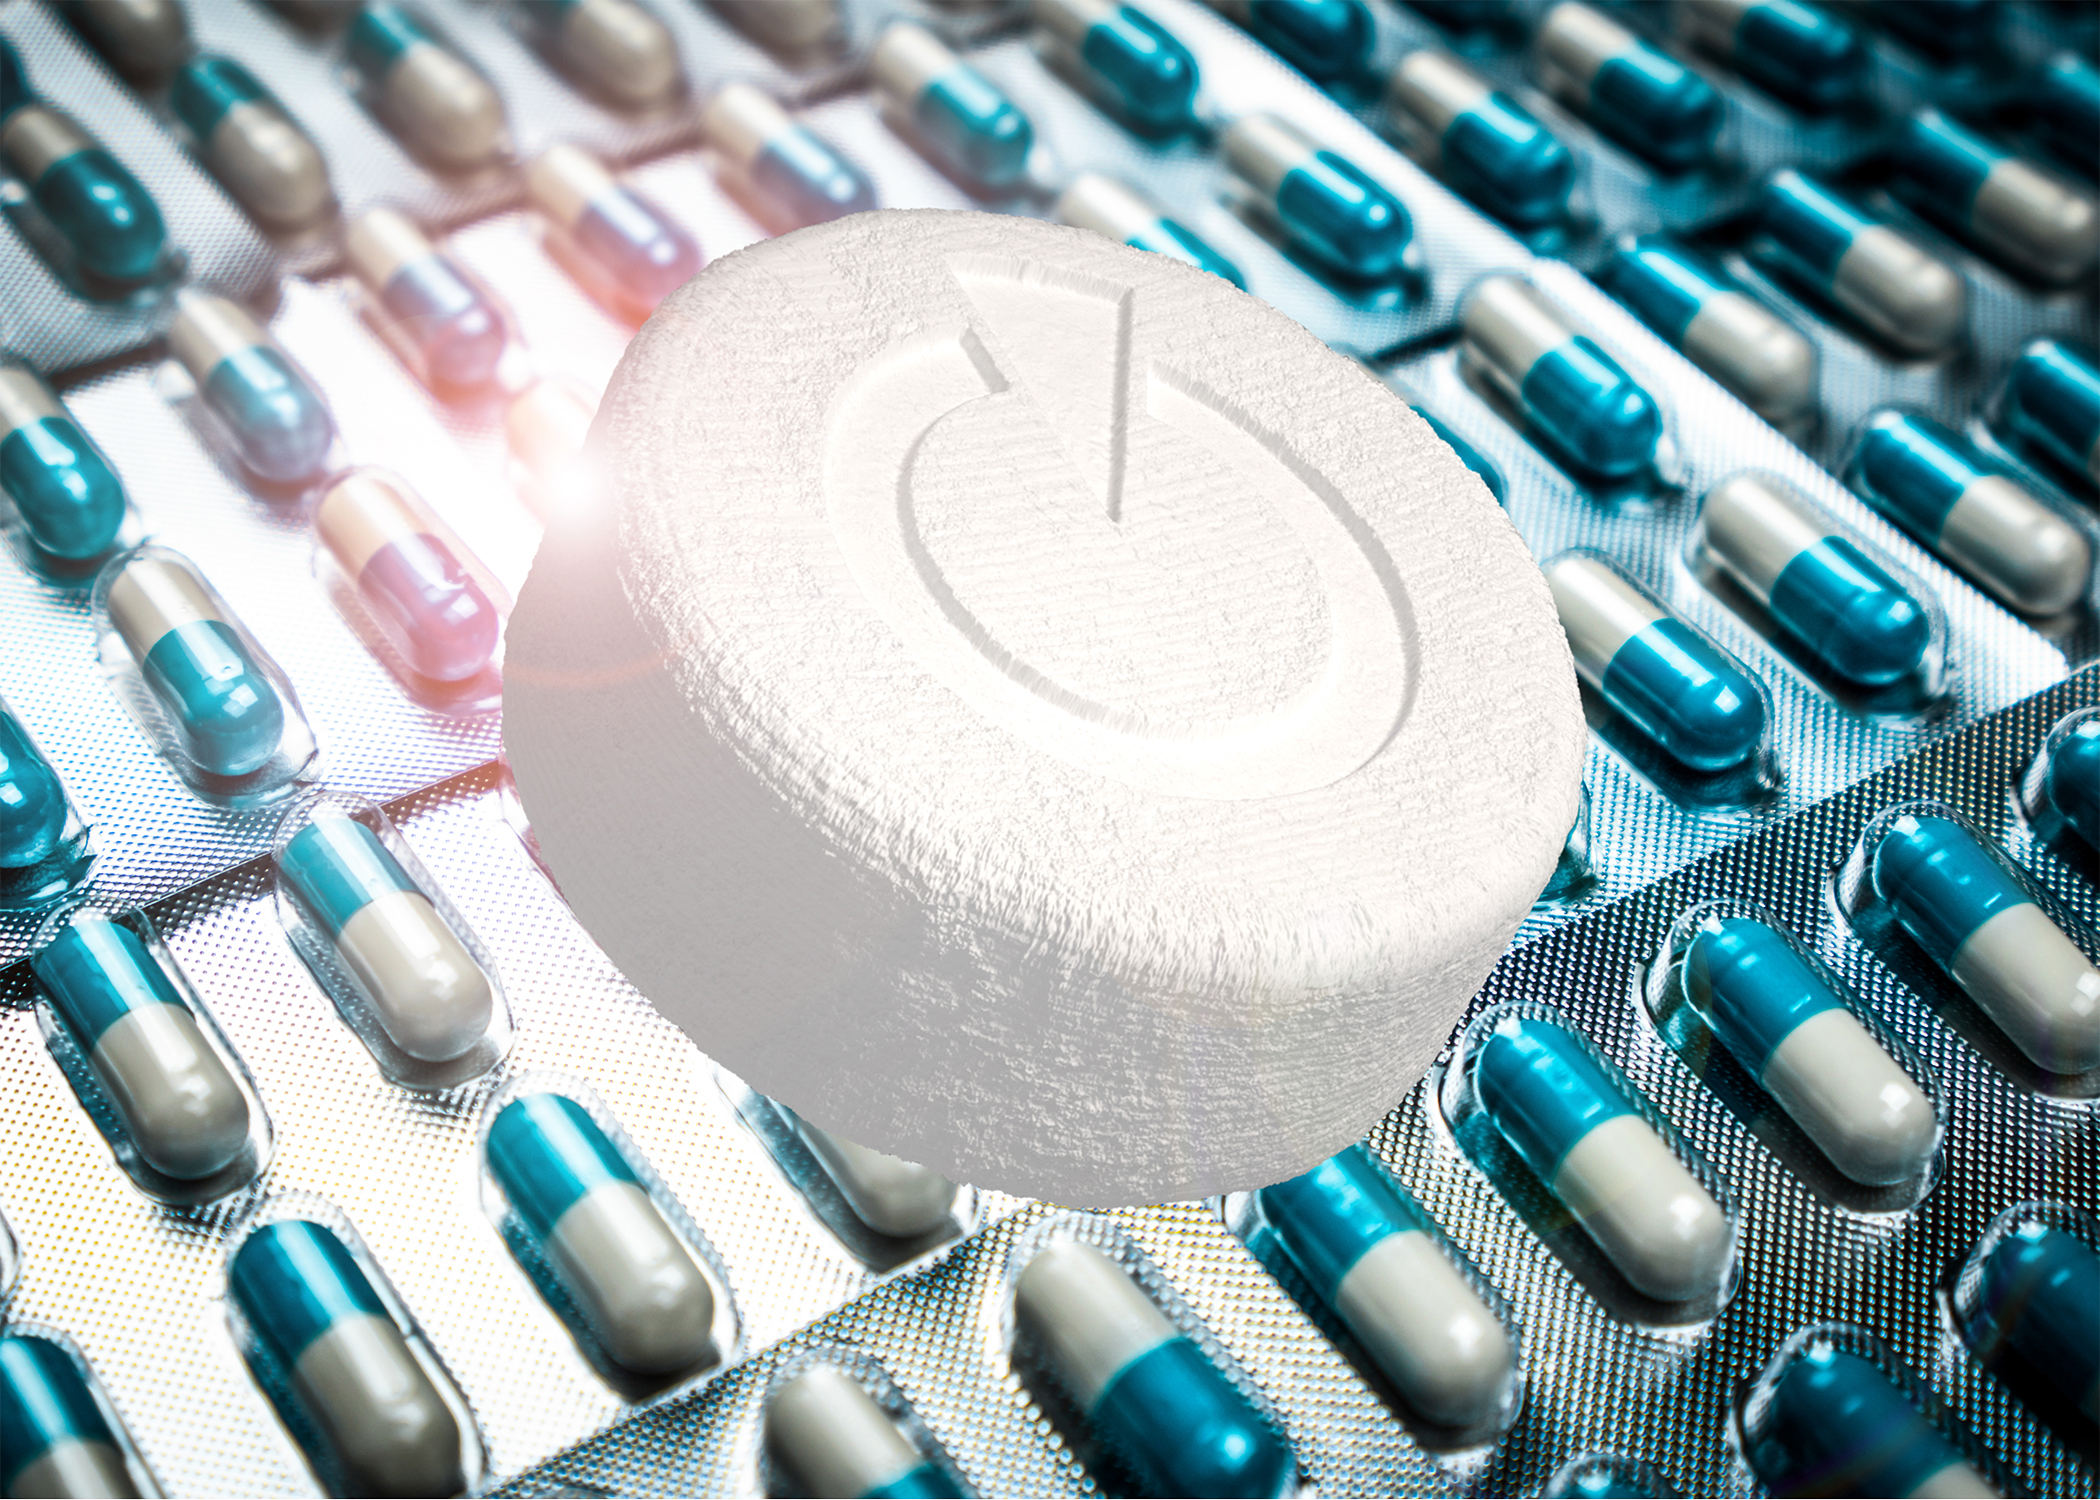 3D printing is a gamechanger in drug manufacturing, as it makes customisable medicines a reality - mostly oral in solid dosage forms, but with realistic production costs.